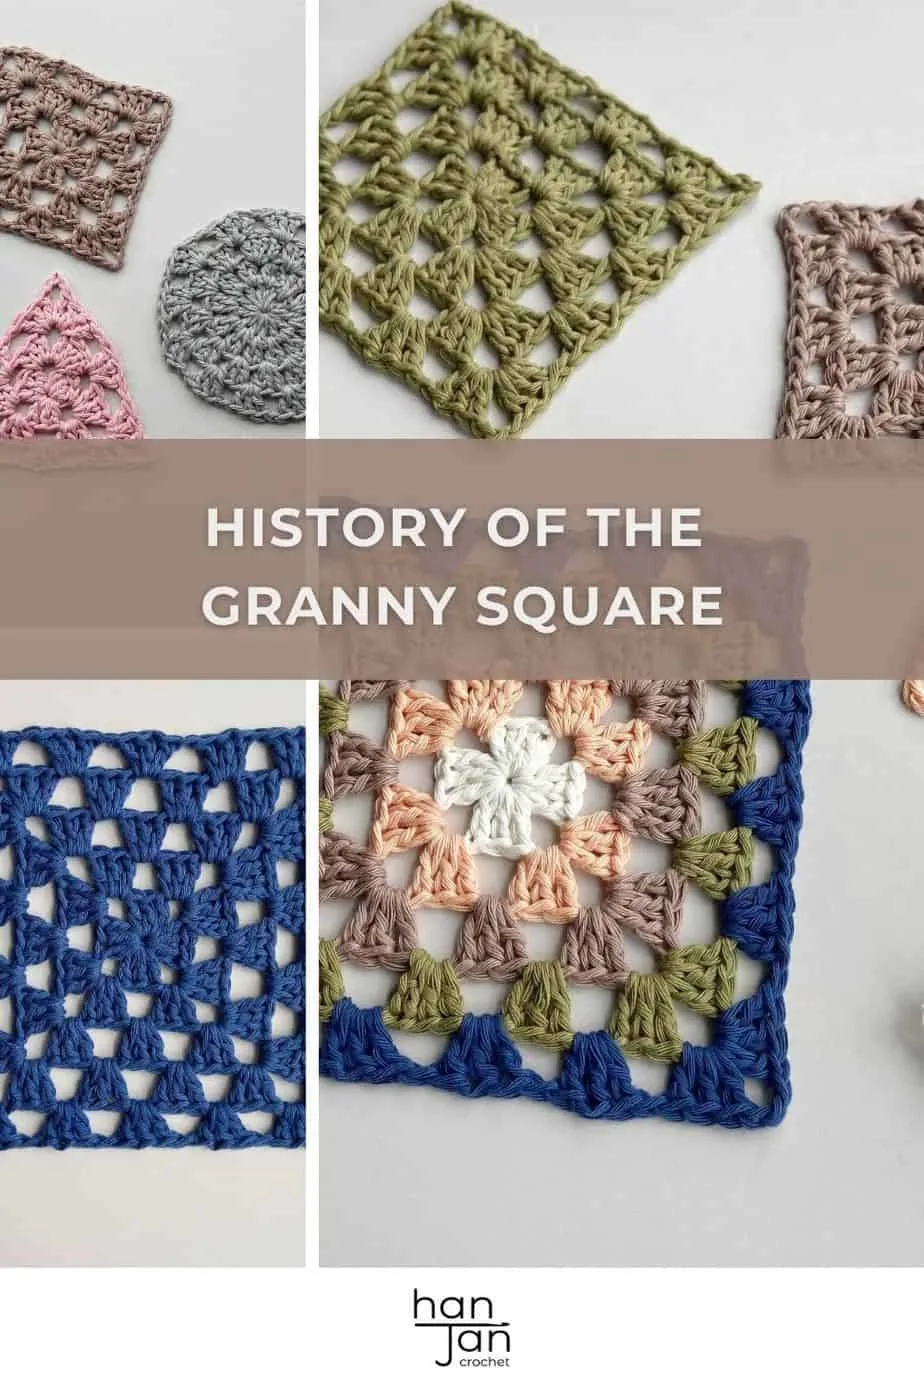 3 images showing different types of granny squares, triangle, circle and square